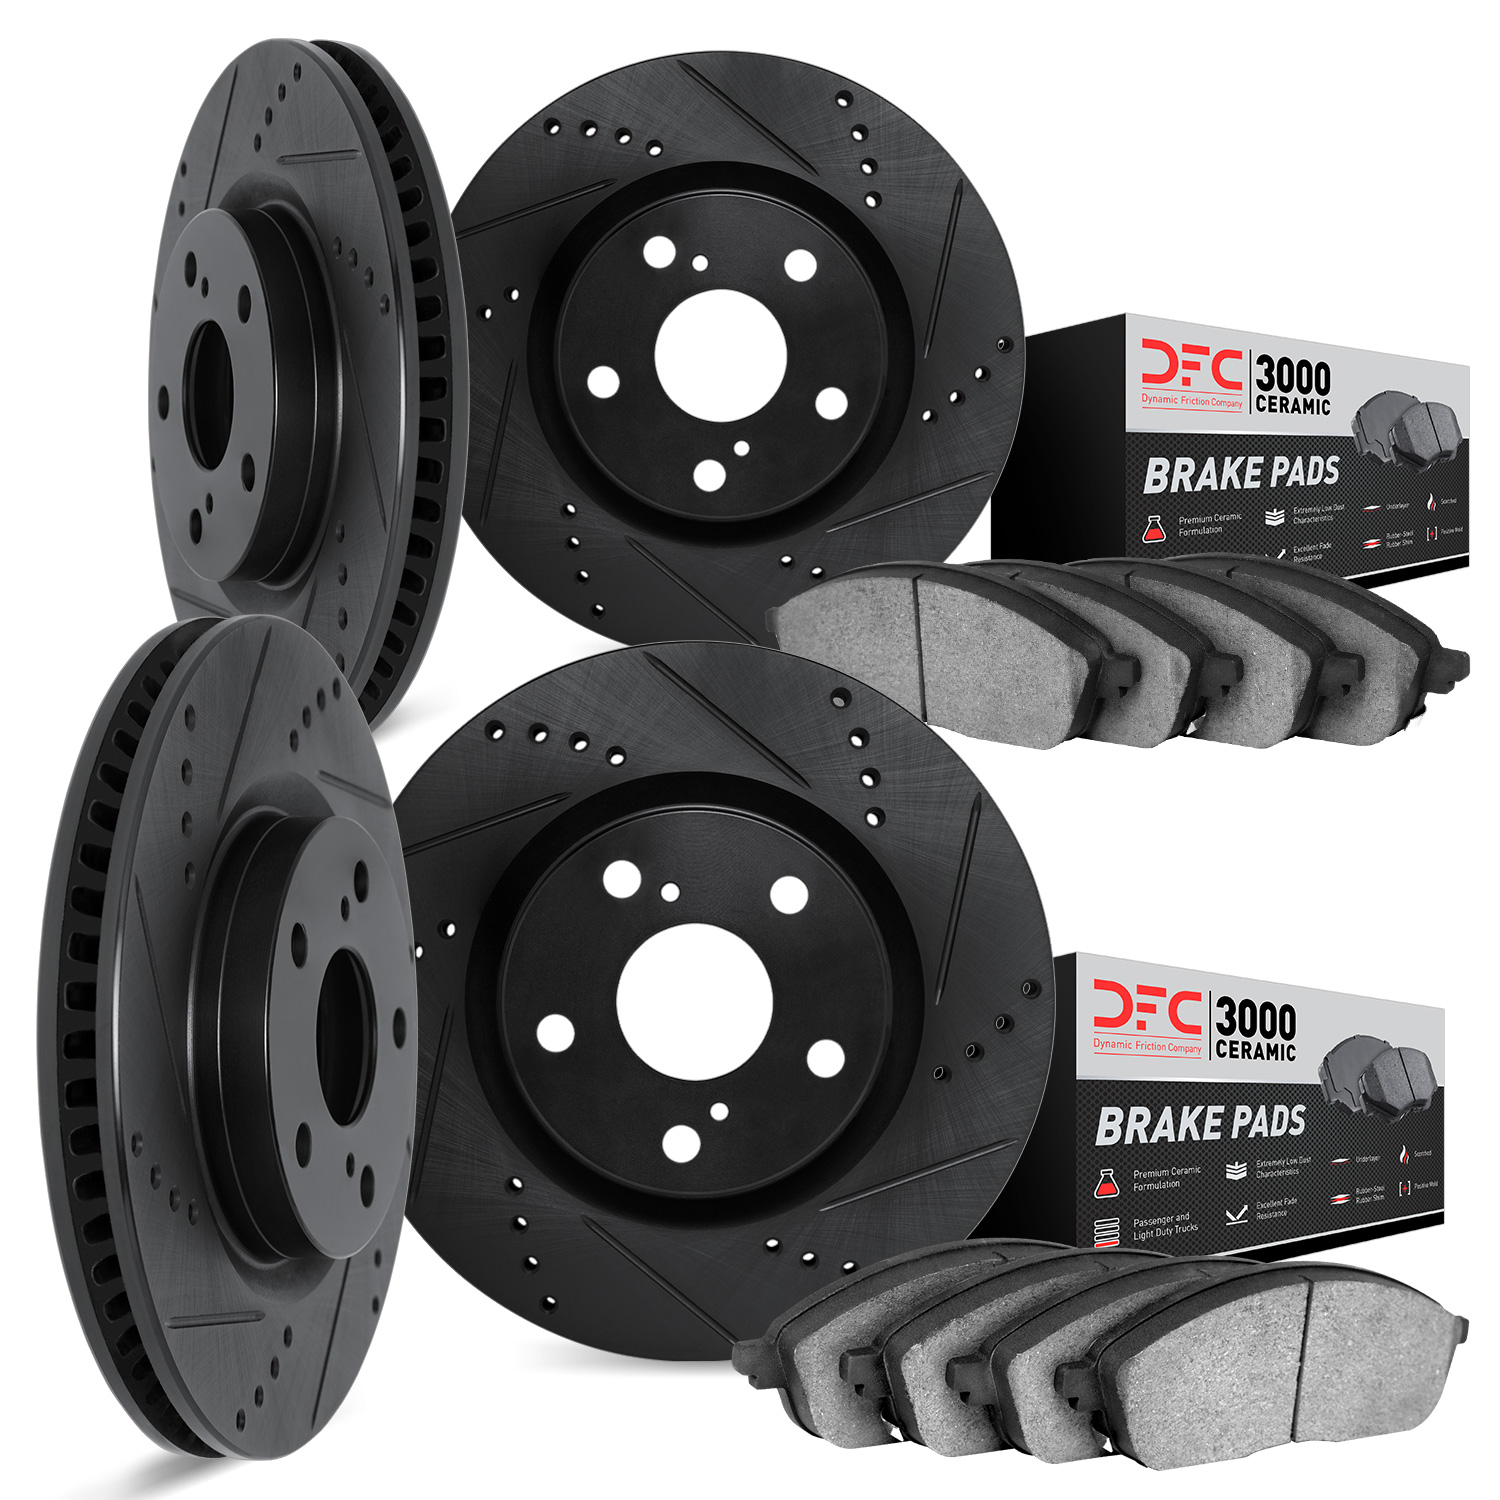 8304-31062 Drilled/Slotted Brake Rotors with 3000-Series Ceramic Brake Pads Kit [Black], 2009-2016 BMW, Position: Front and Rear